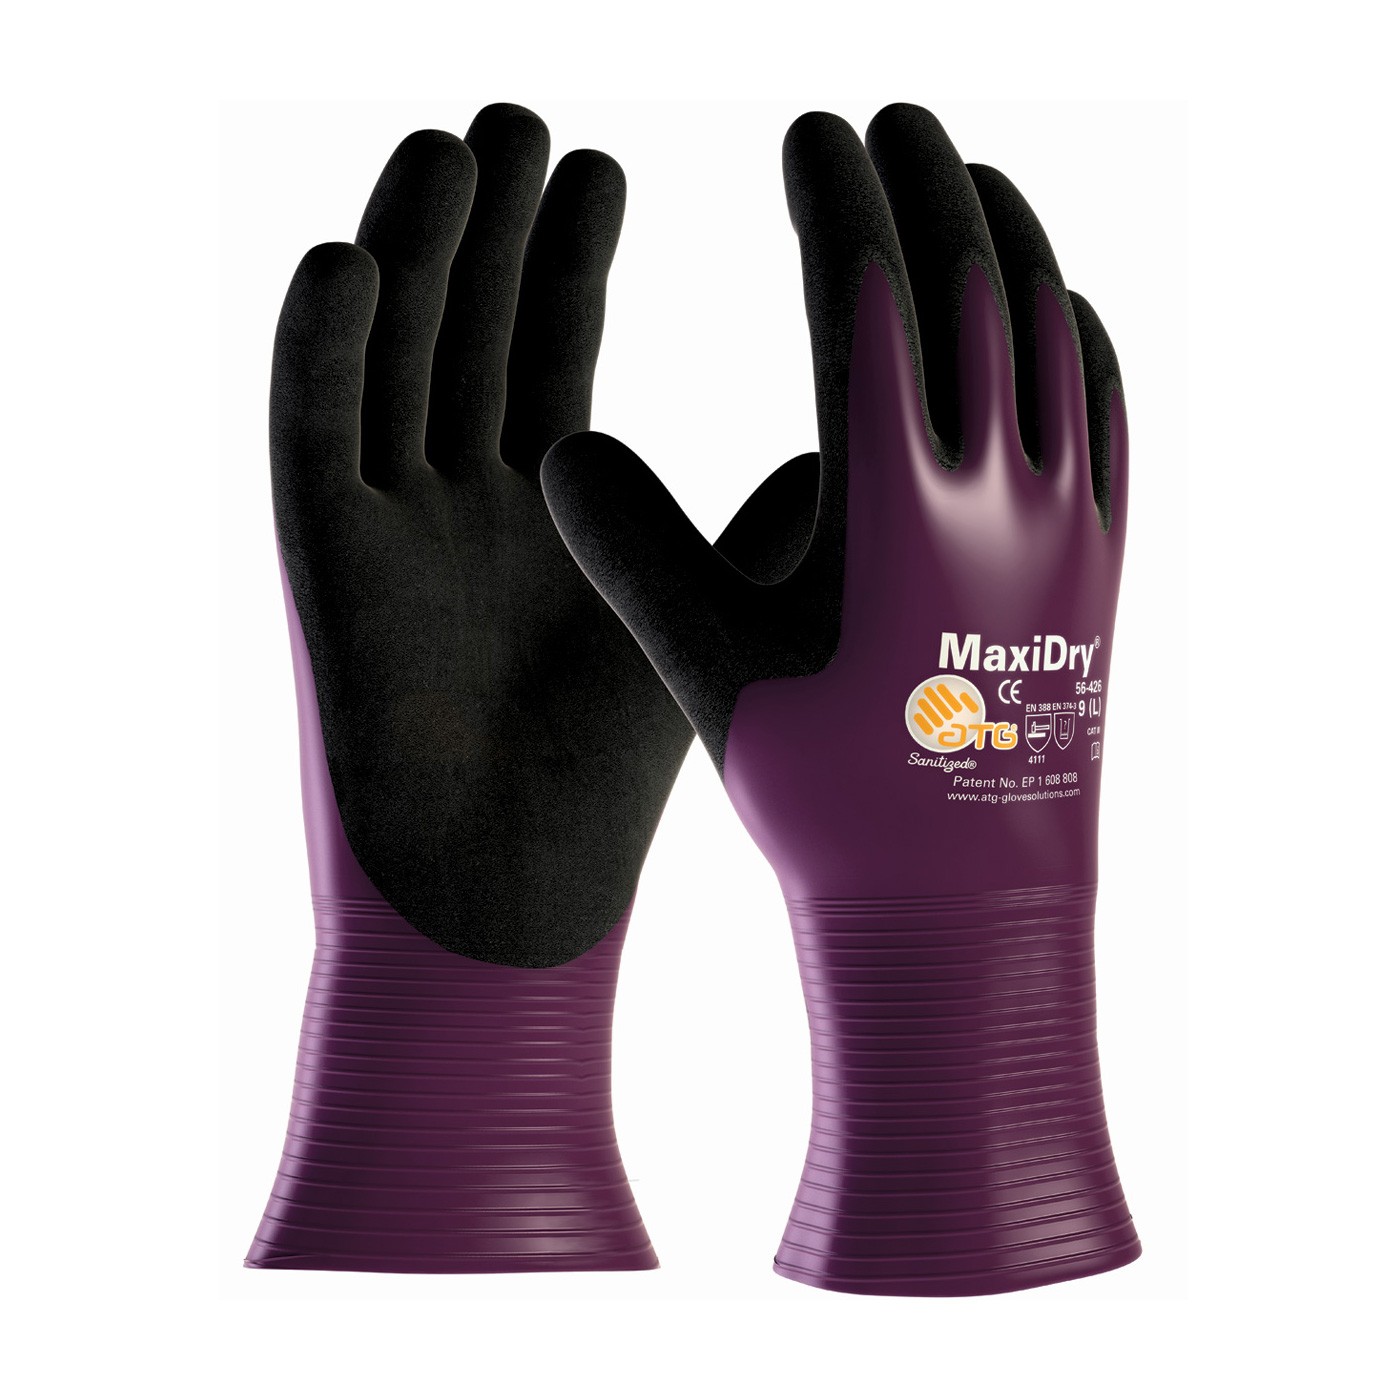  MaxiDry® Ultra Lightweight Nitrile Glove, Fully Dipped with Seamless Knit Nylon / Lycra Liner and Non-Slip Grip on Palm & Fingers (#56-426)